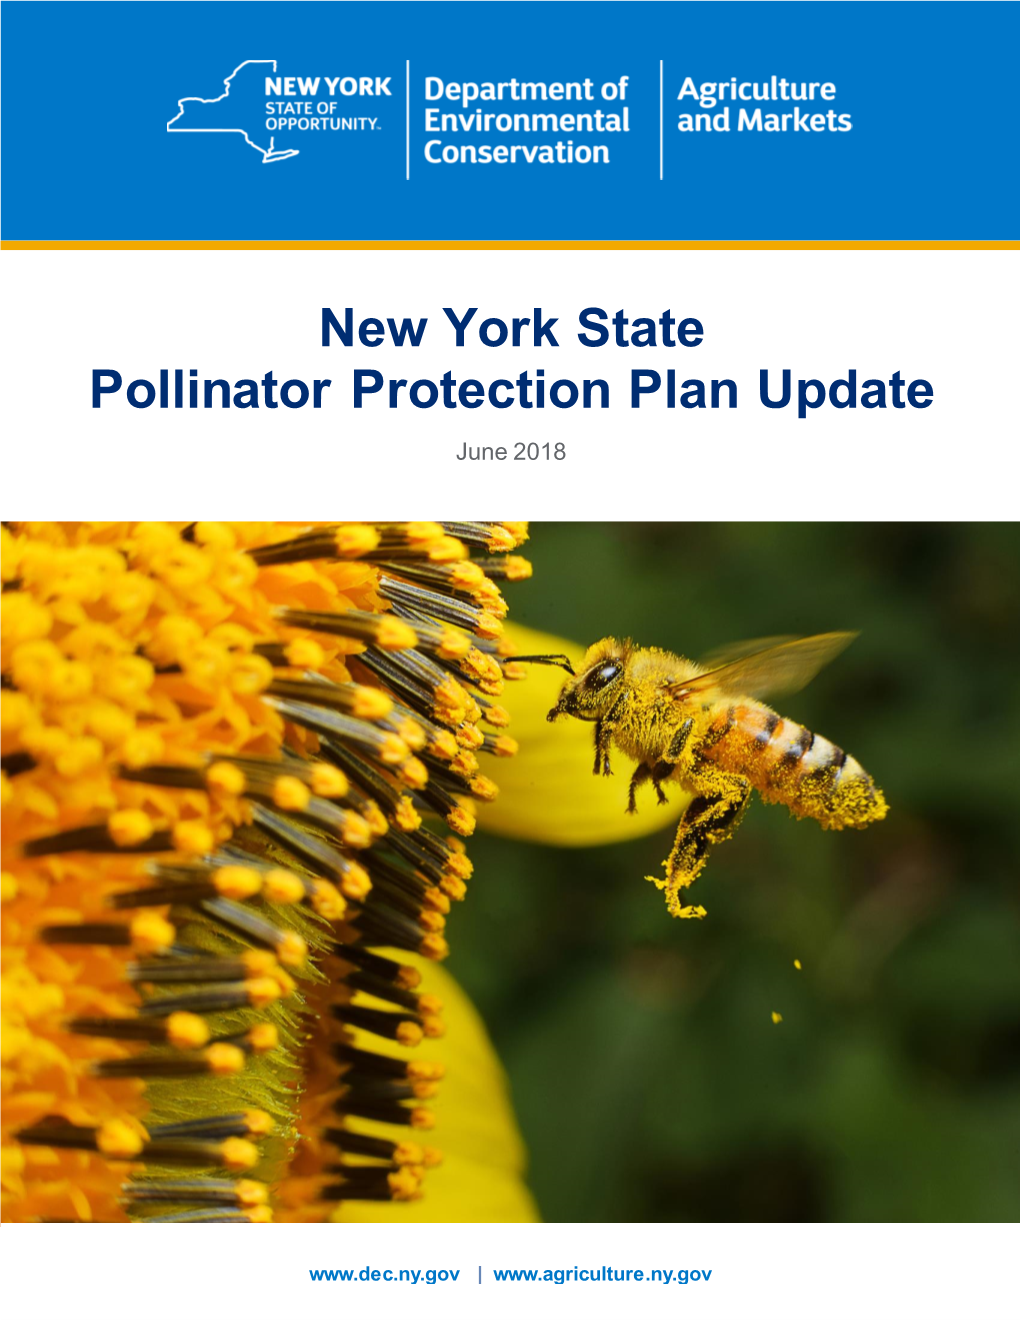 New York State Pollinator Protection Plan Update June 2018